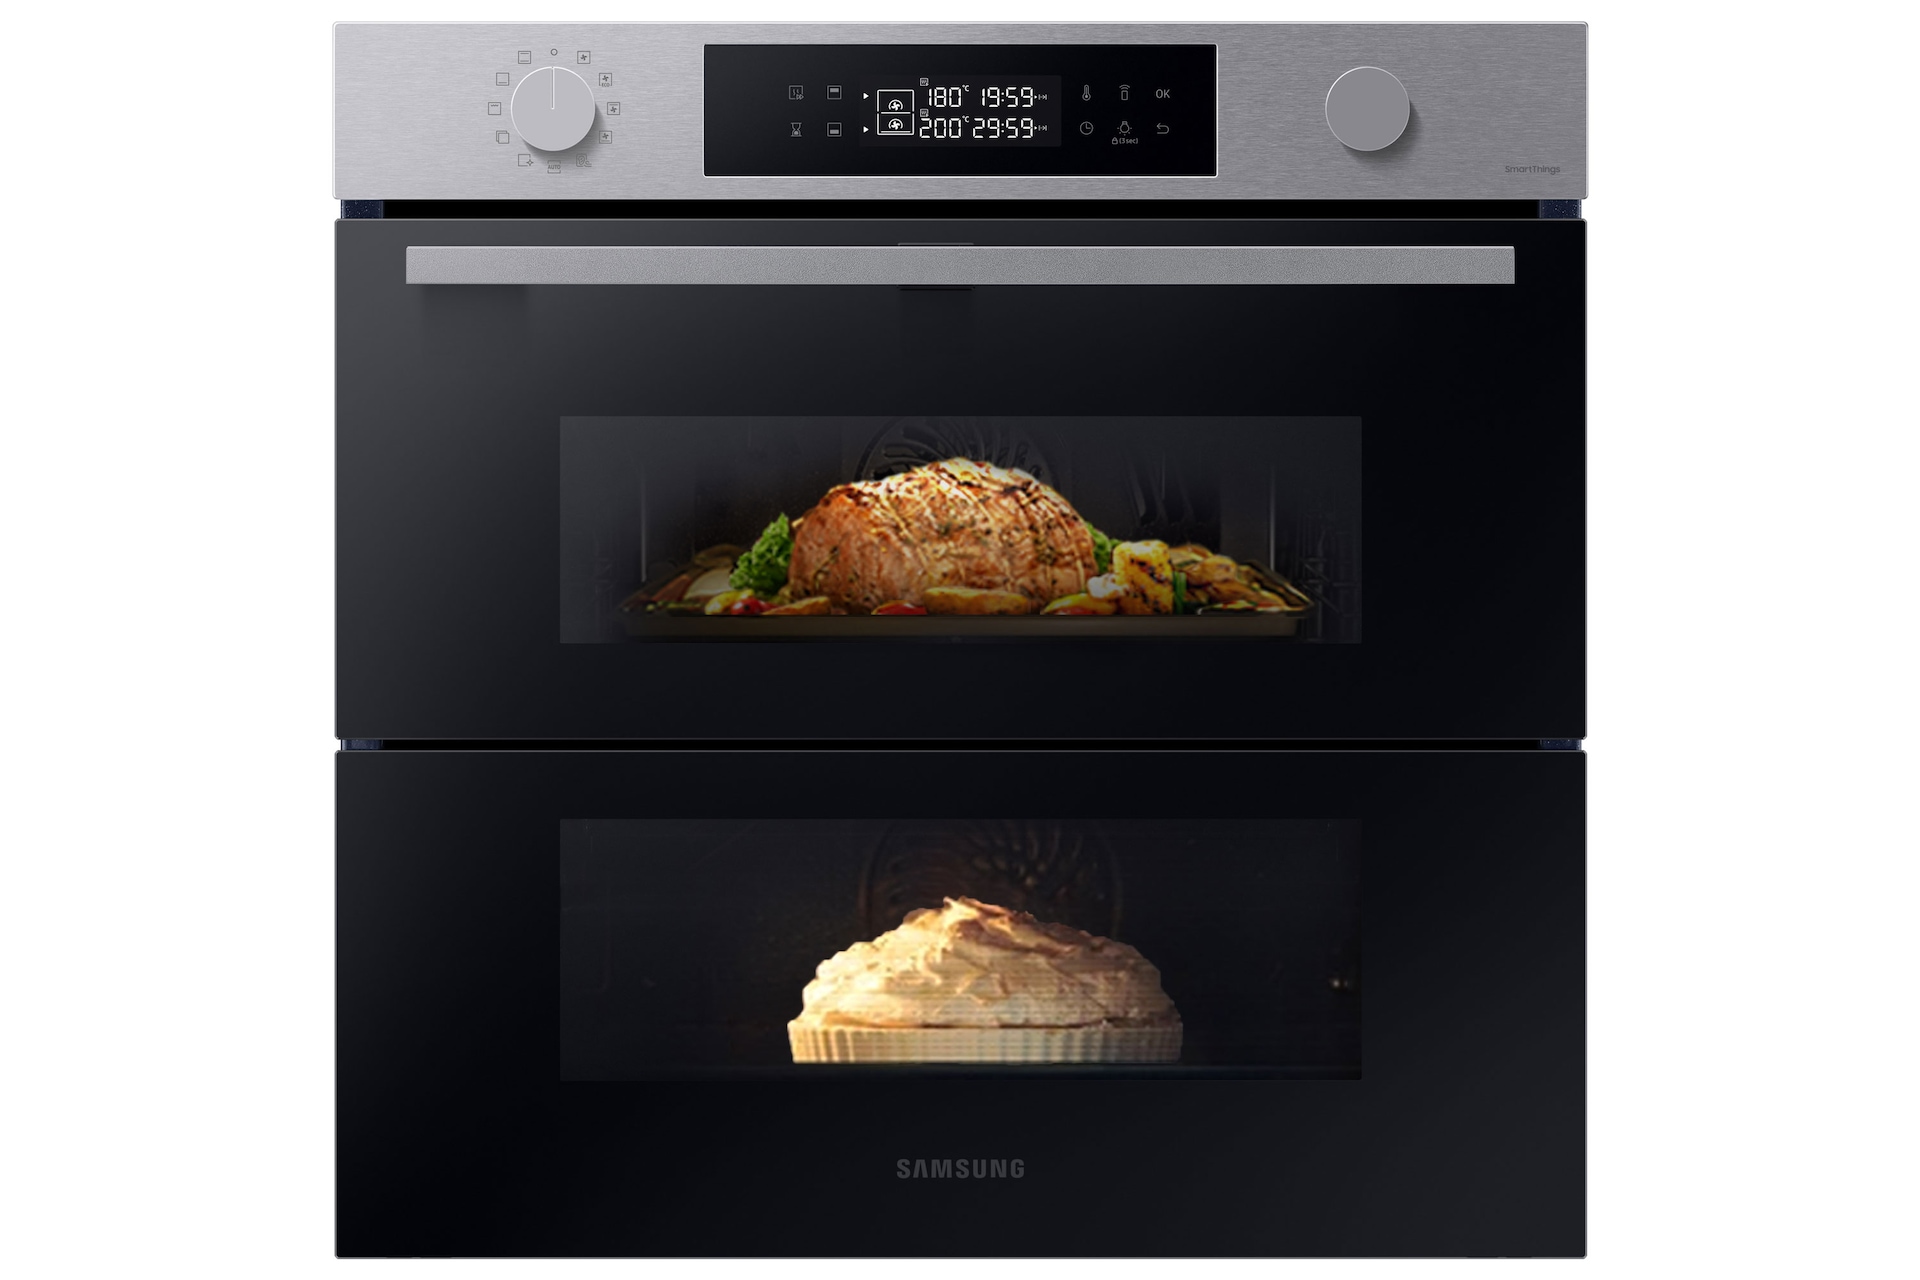 SAMSUNG Series 4 Smart Electric Oven with Dual Cook Flex